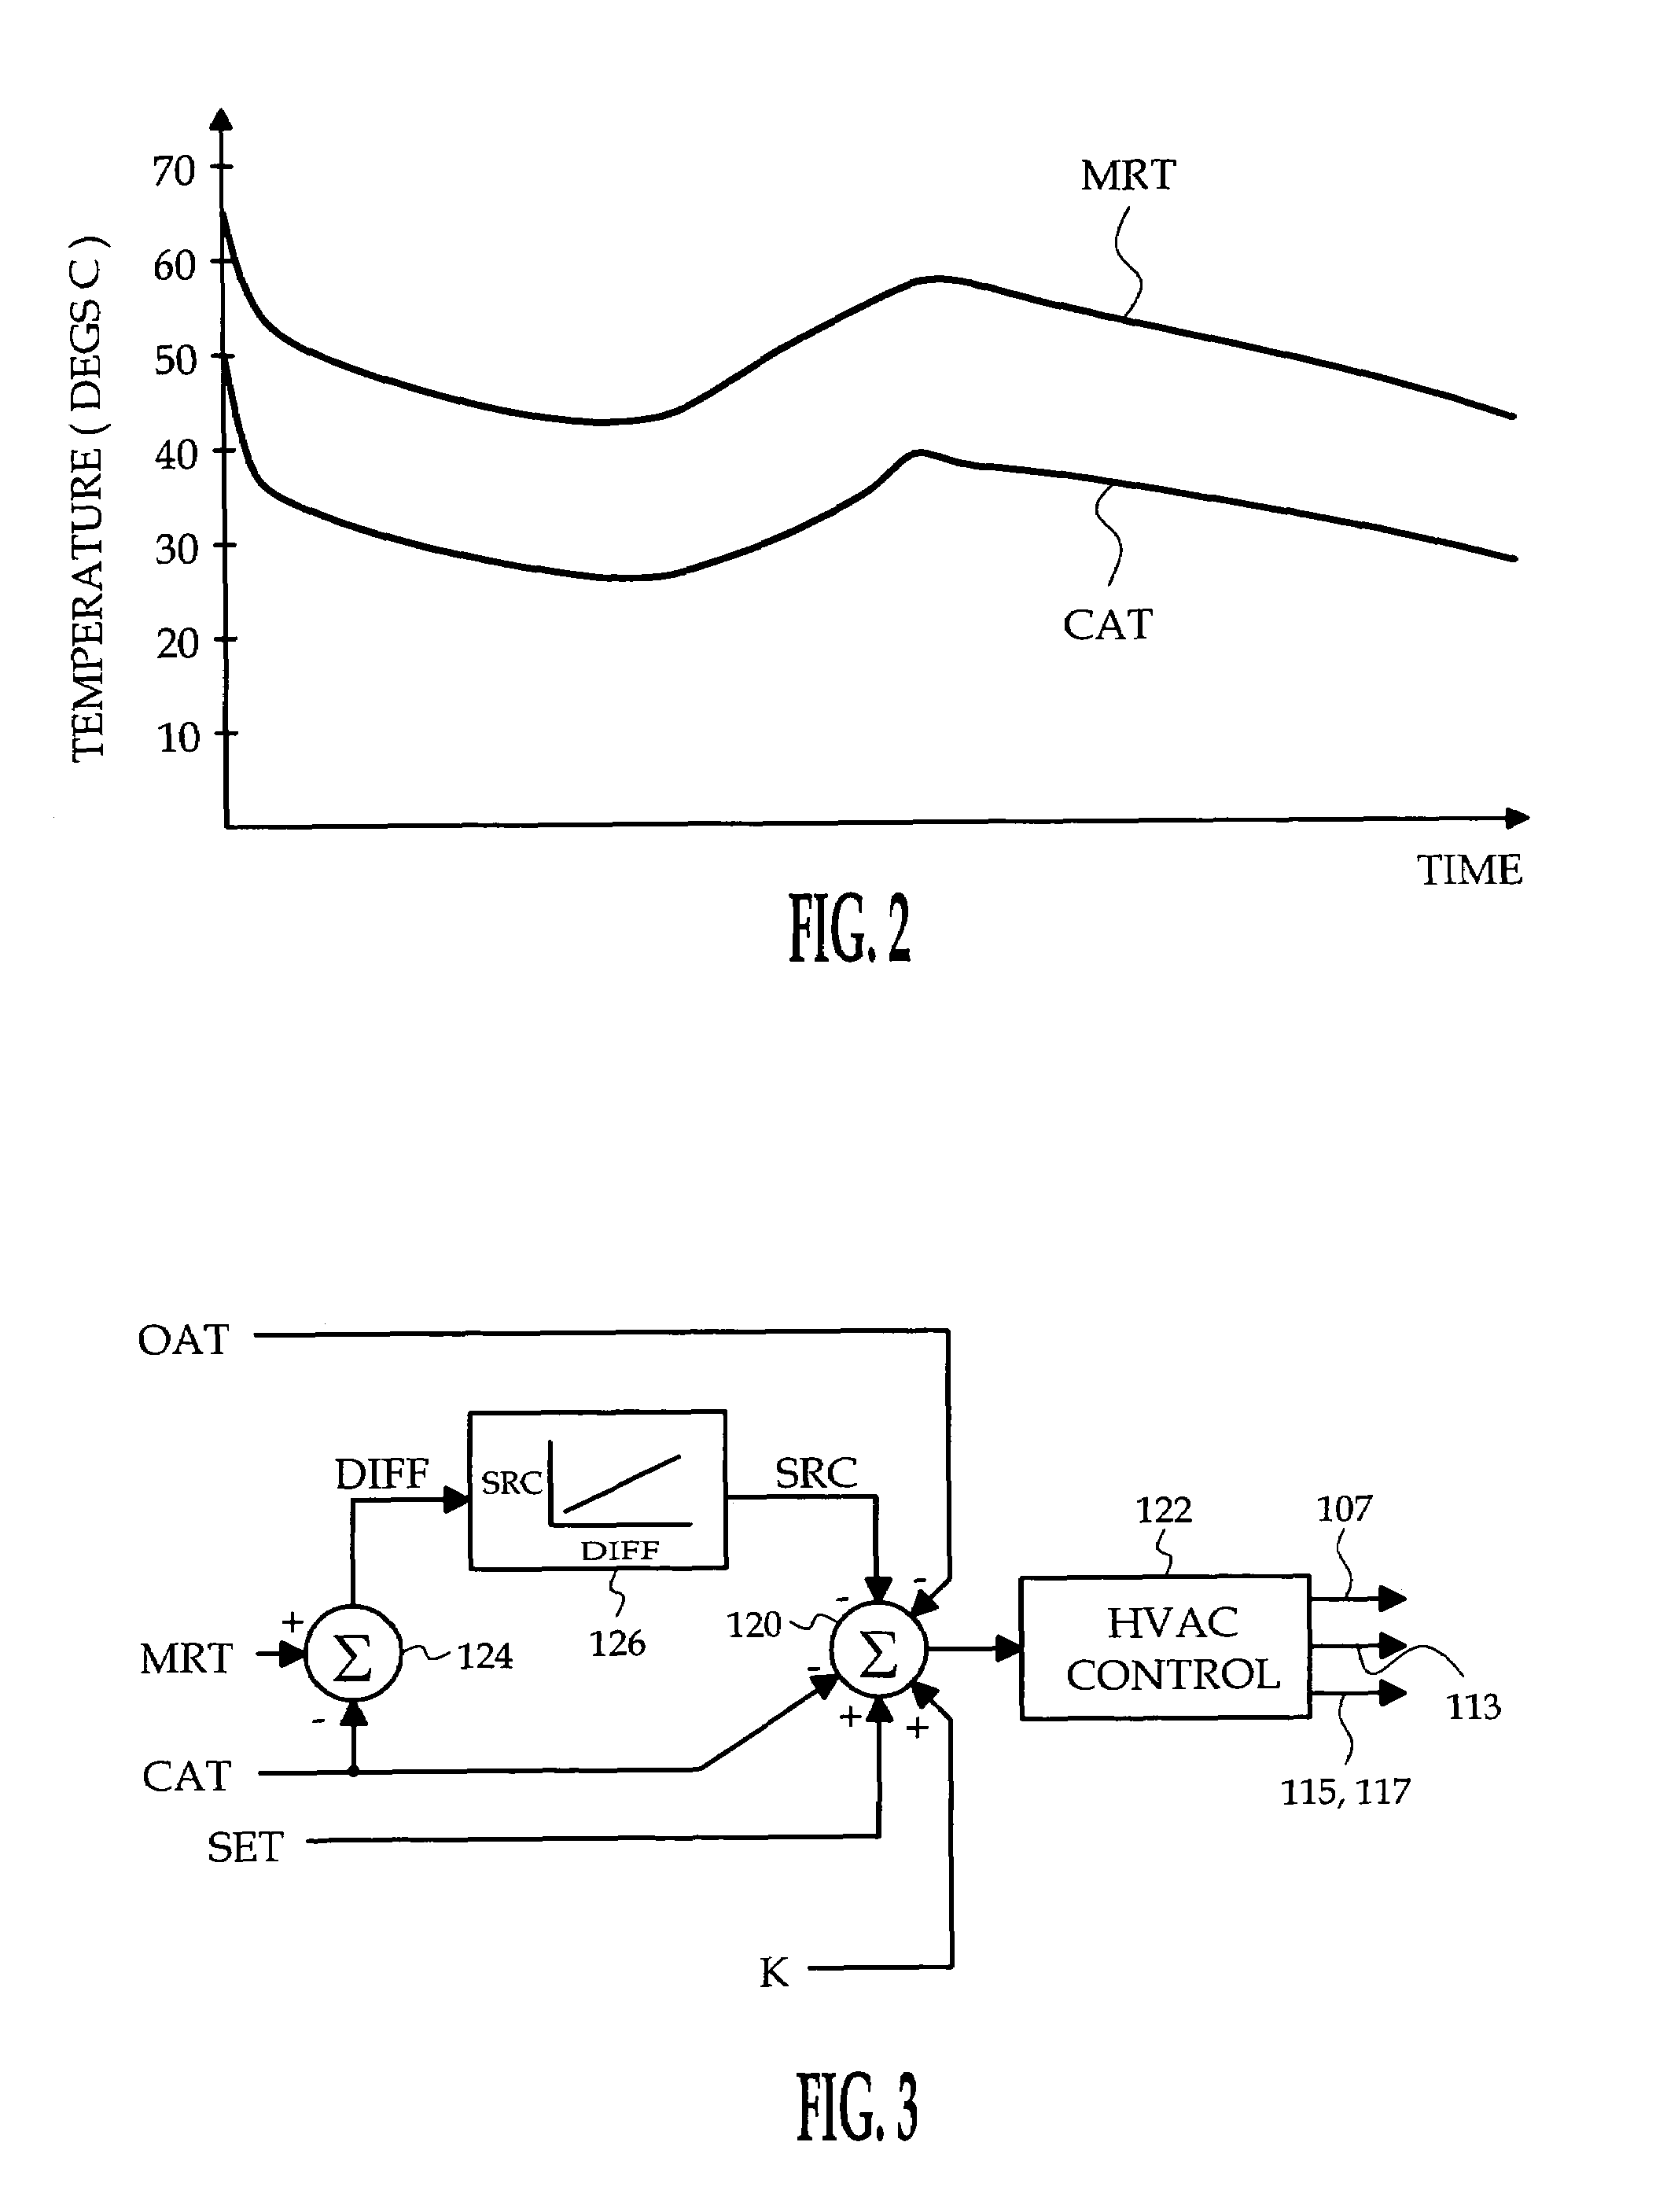 Solar radiation compensation method for a vehicle climate control